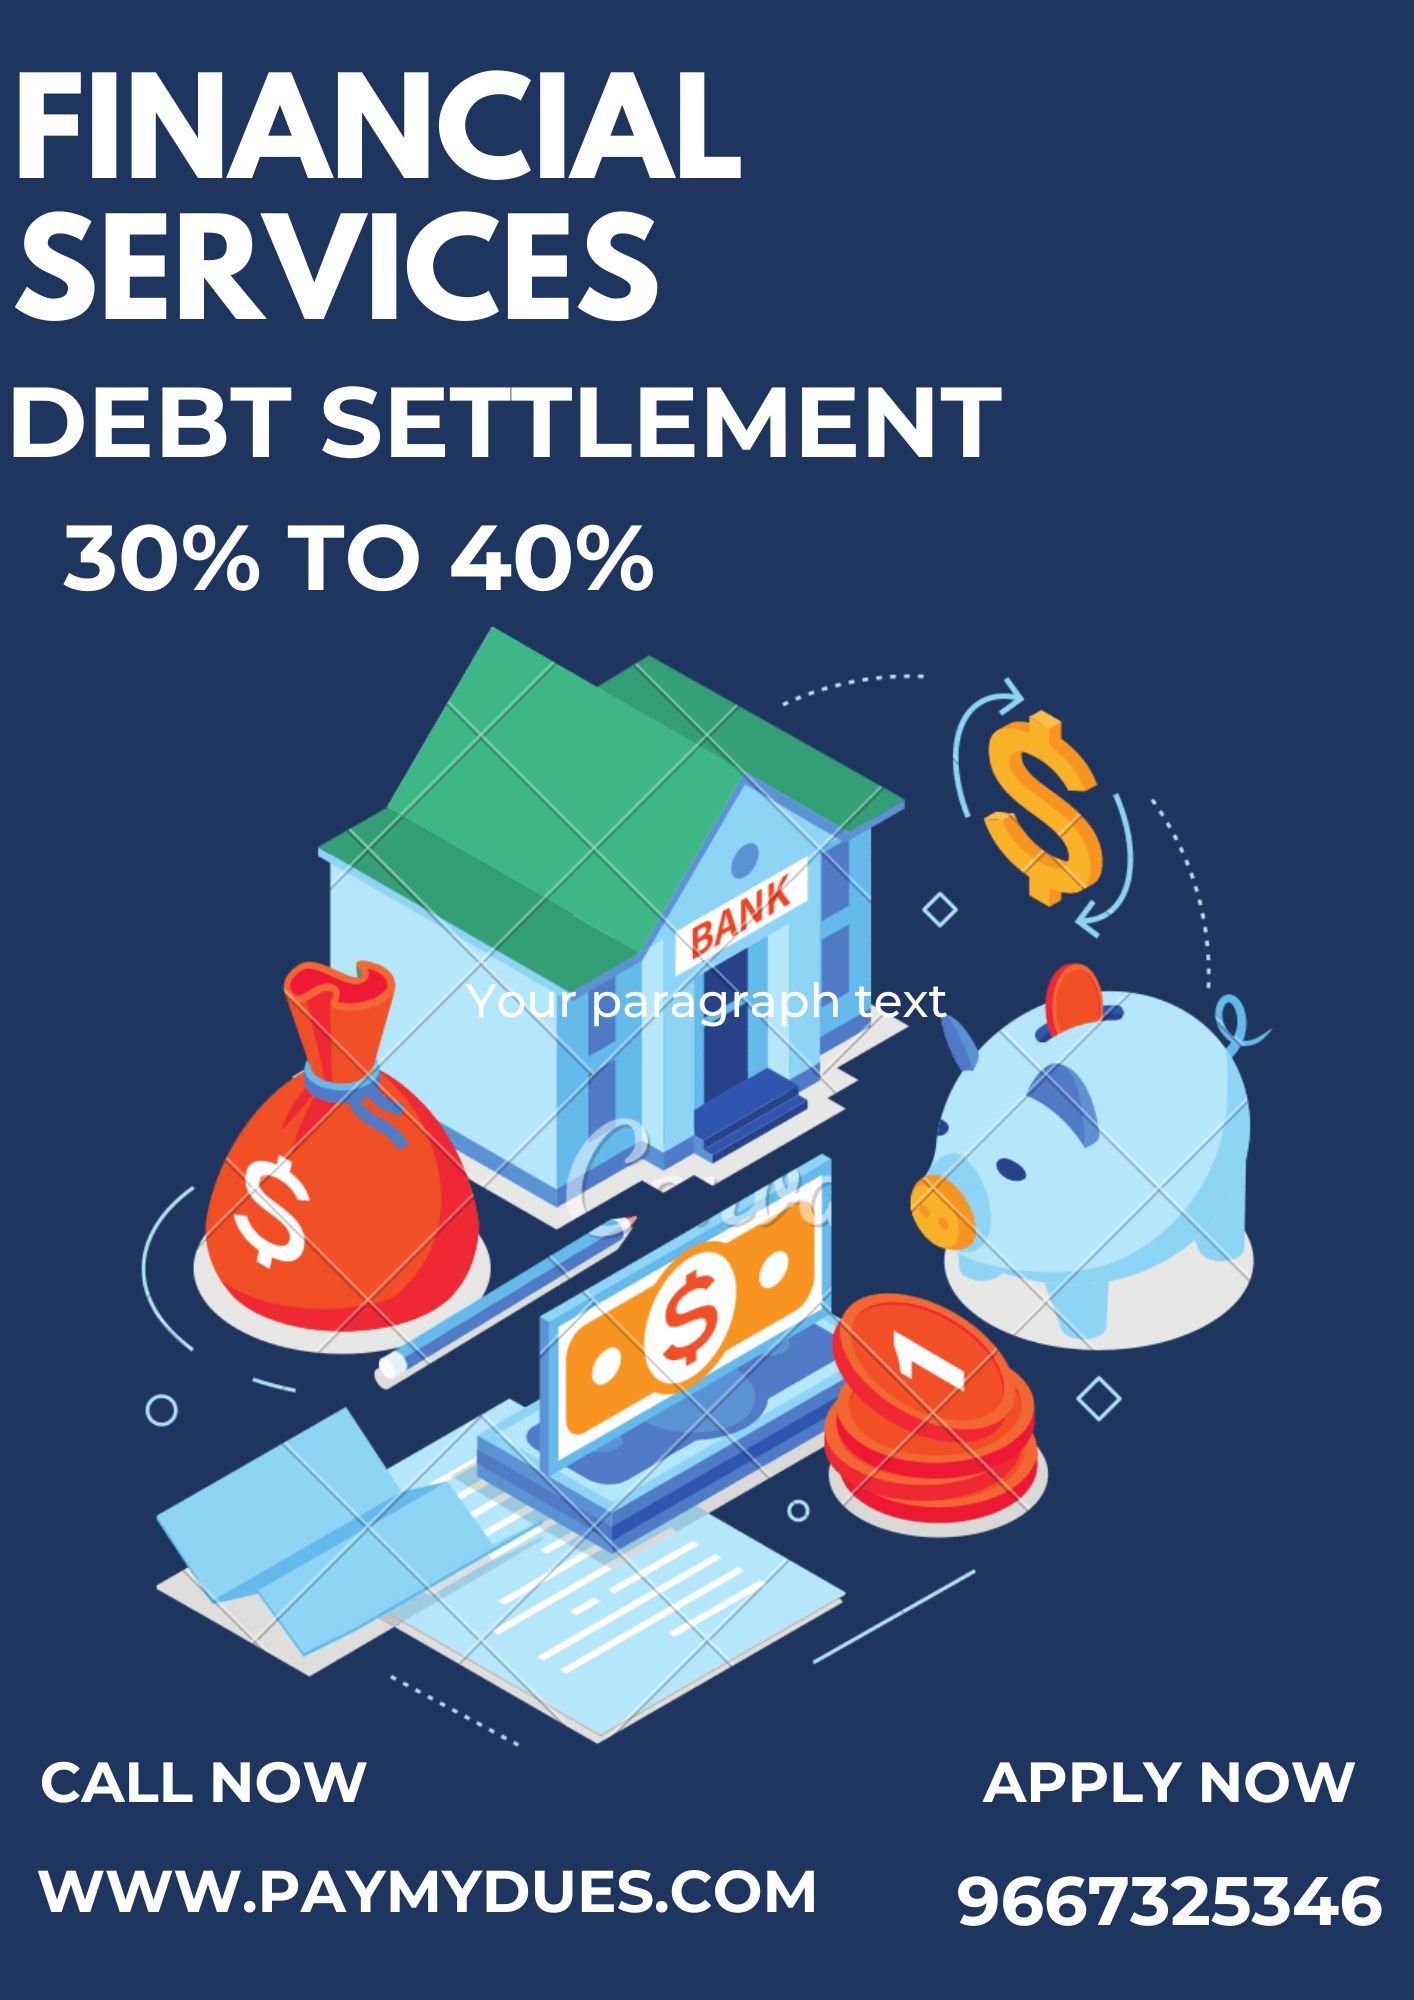 FINANCIAL SERVICES AND DEBT SETTLEMENT 